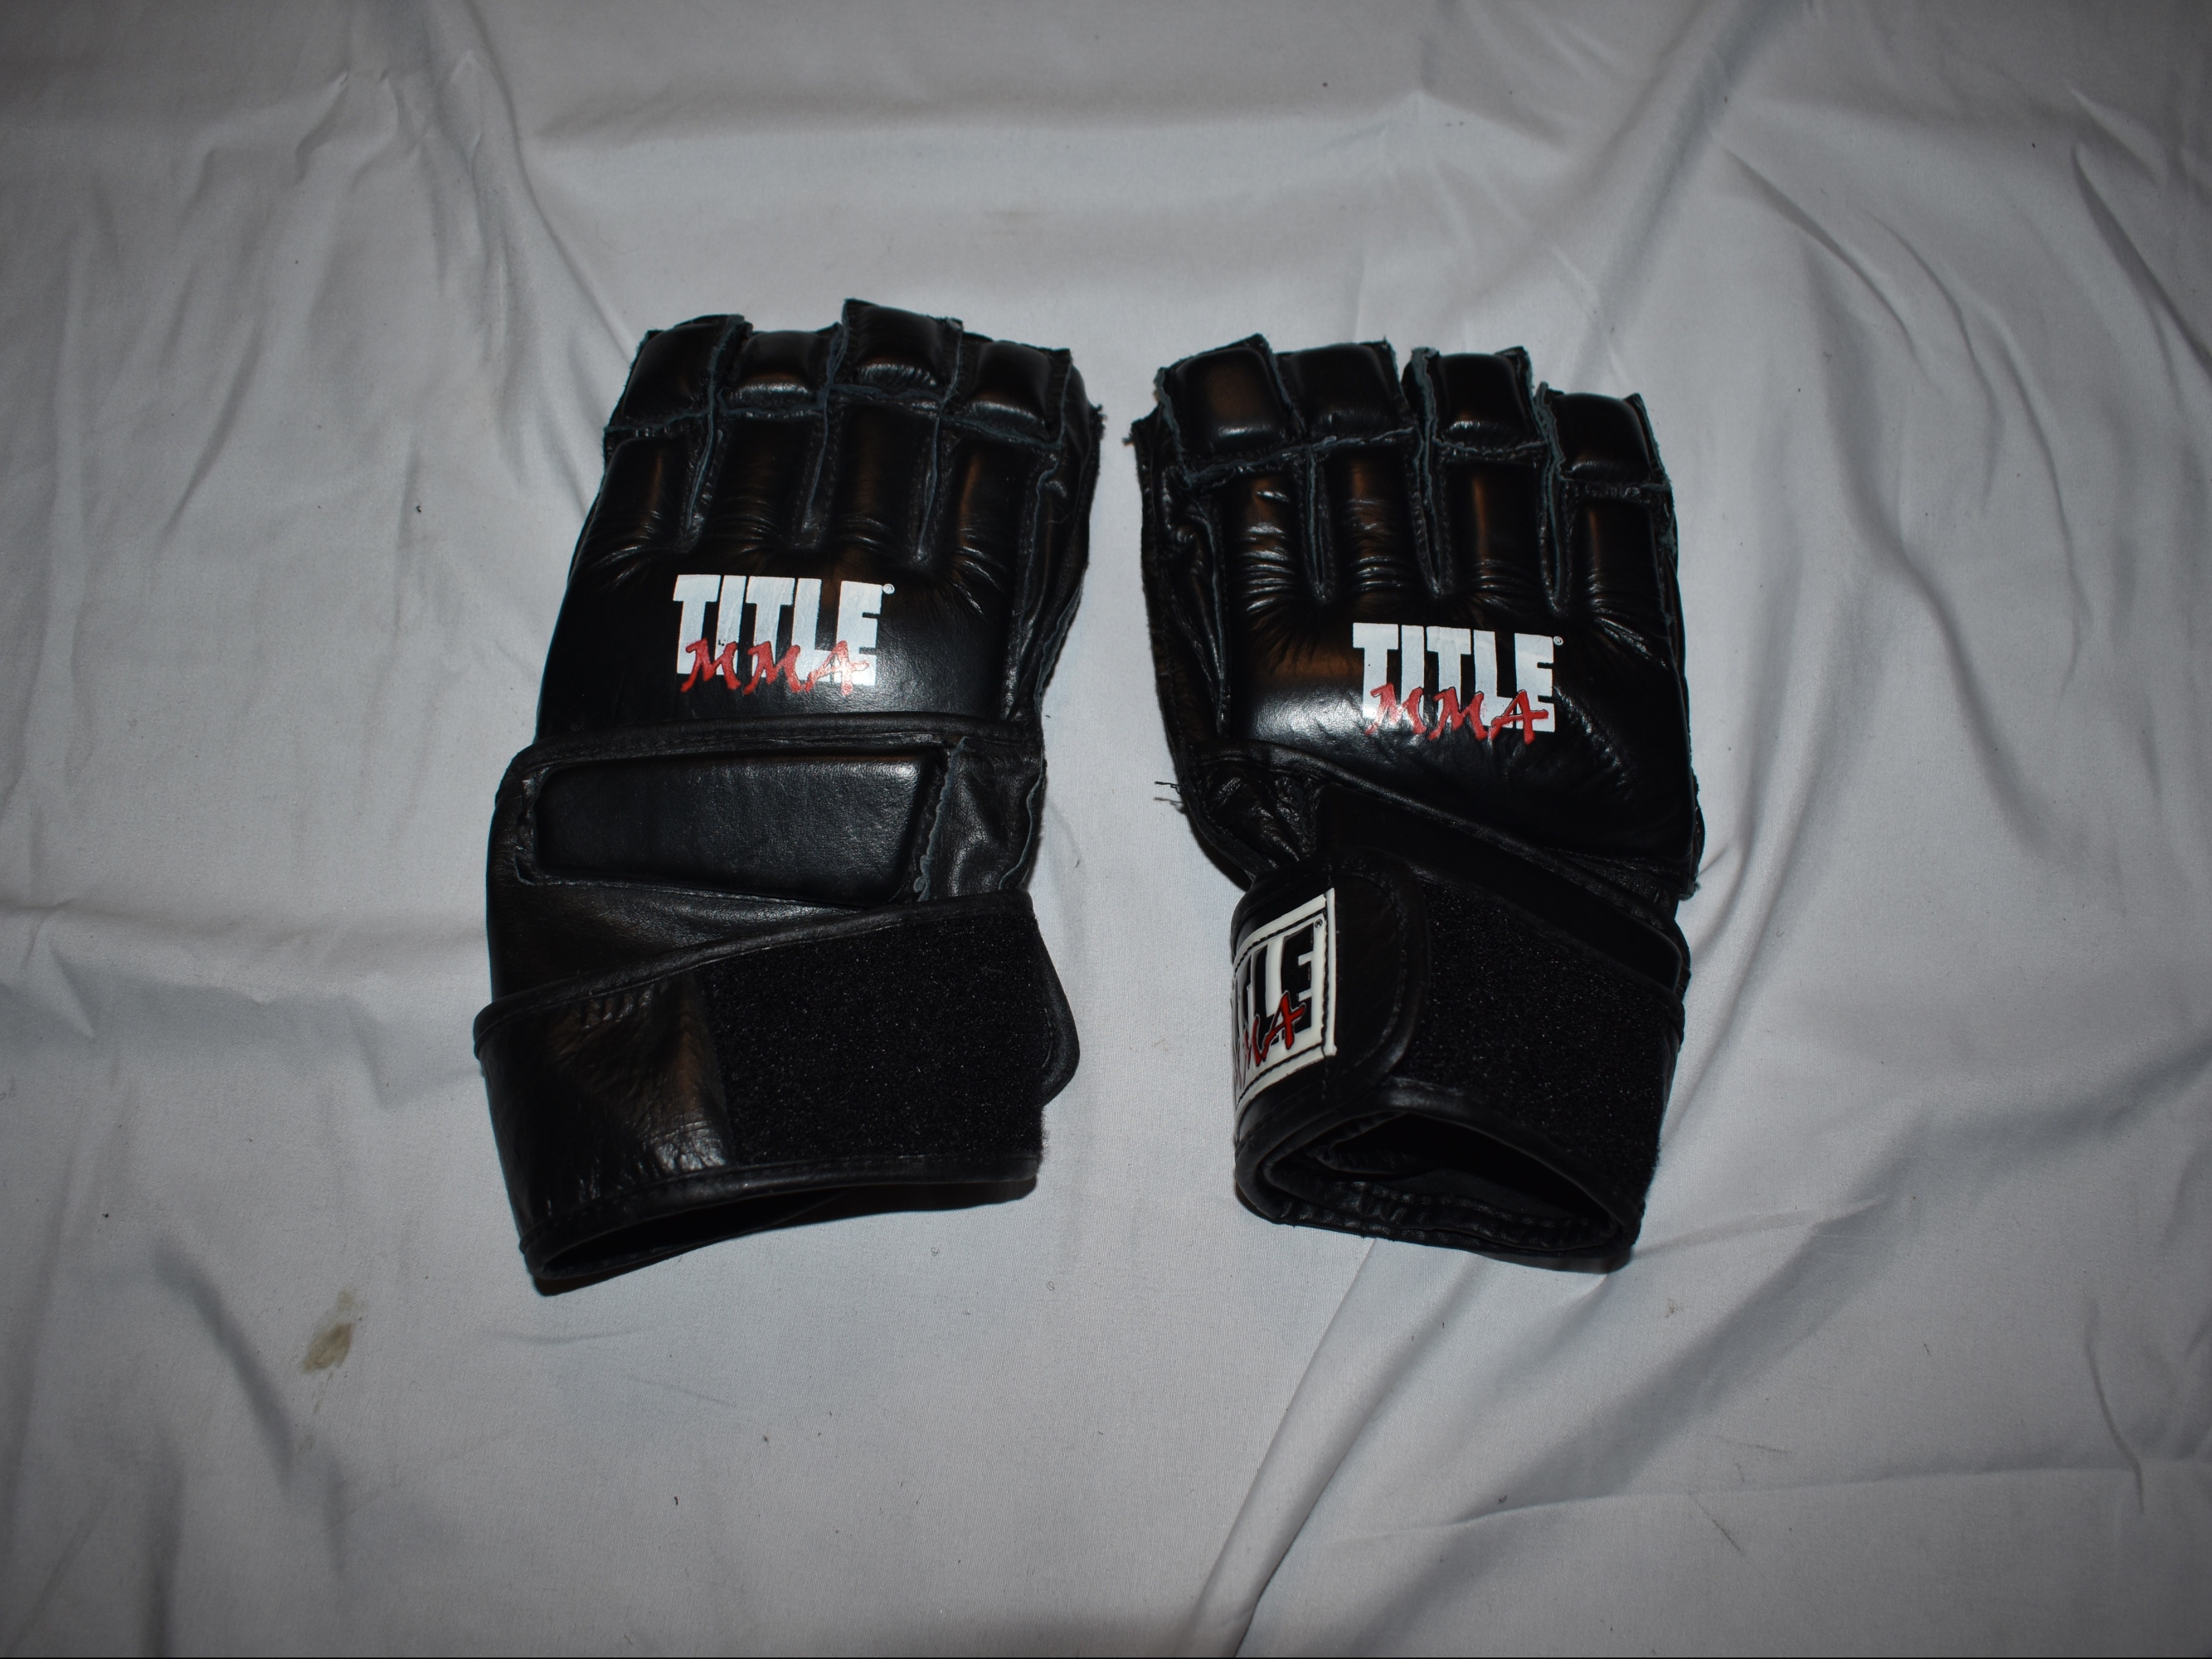 Title MMA Gloves, Black, Large, Great Condition!